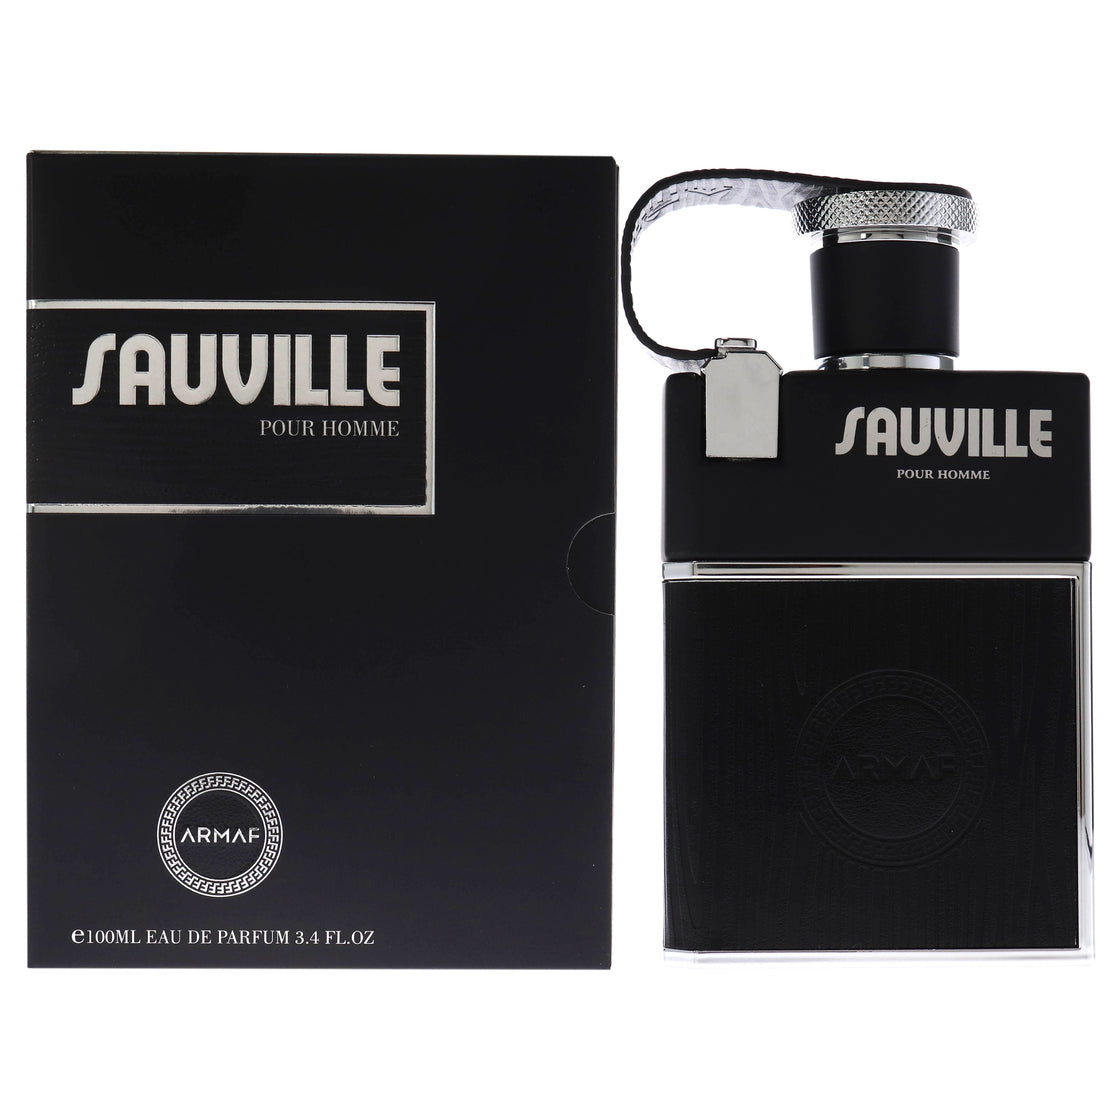 Sauville by Armaf for Men - 3.4 oz EDP Spray